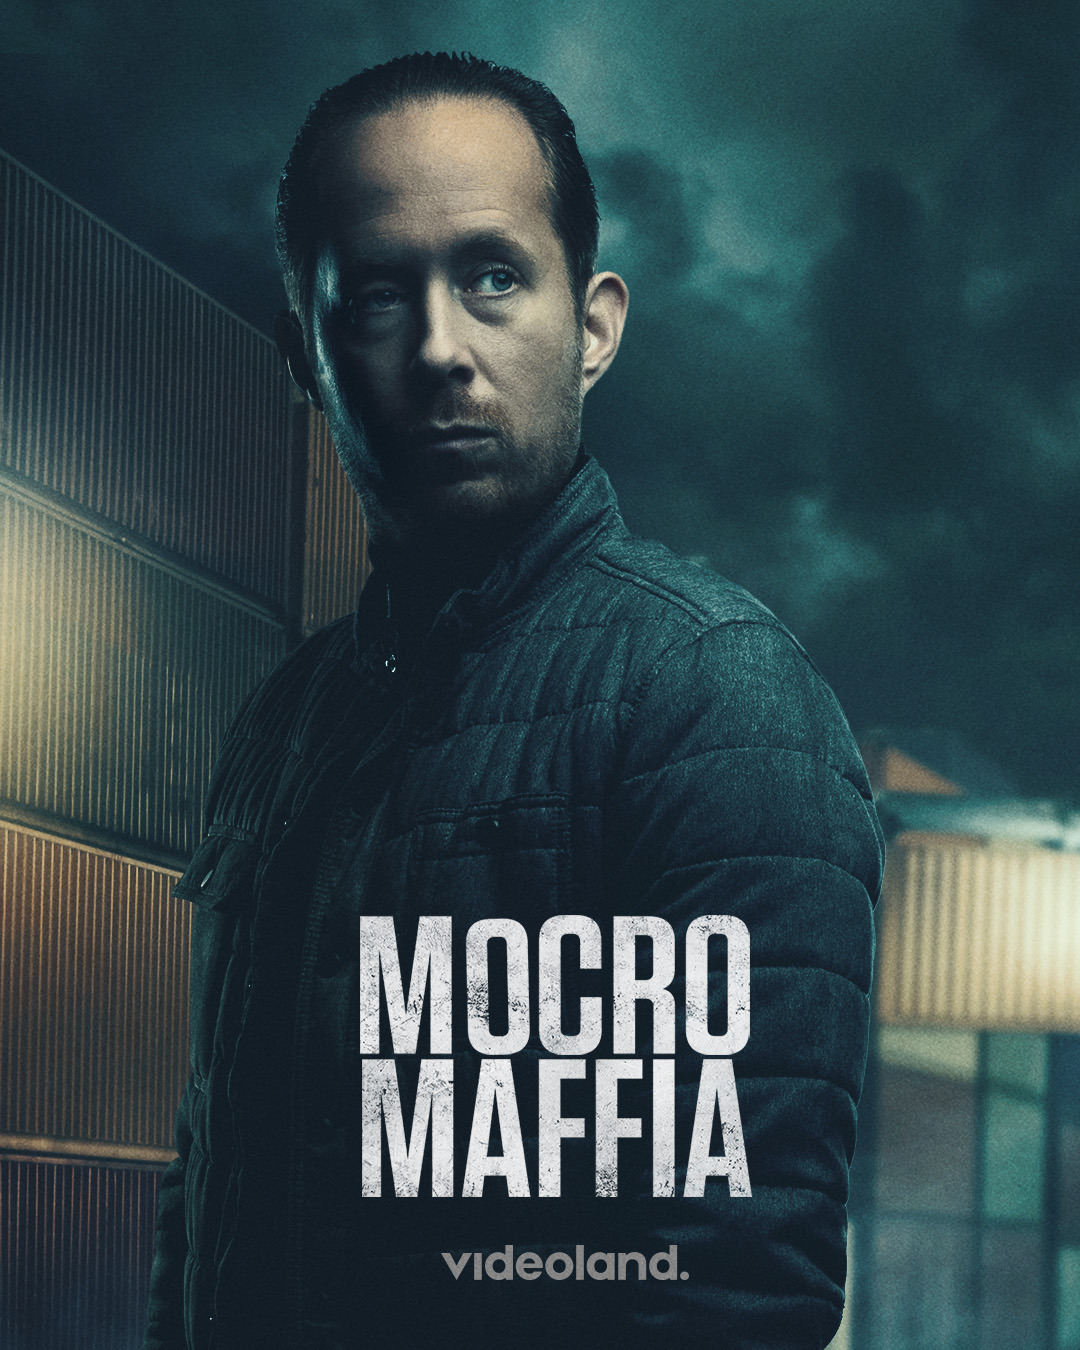 Extra Large TV Poster Image for Mocro maffia (#9 of 11)